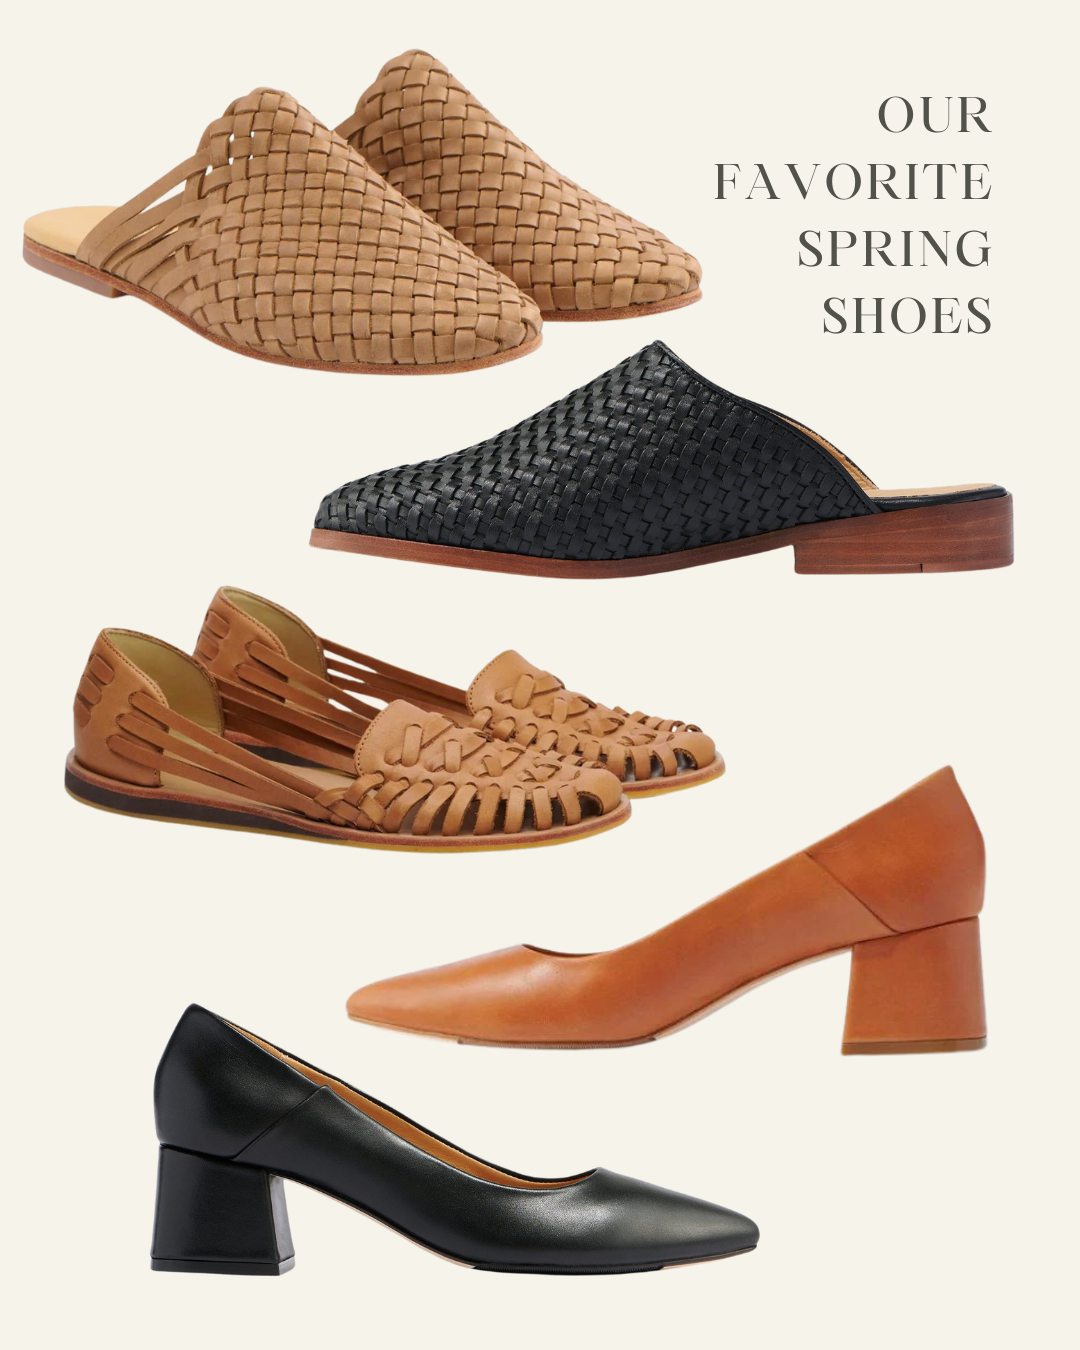 Our Favorite Spring Shoes